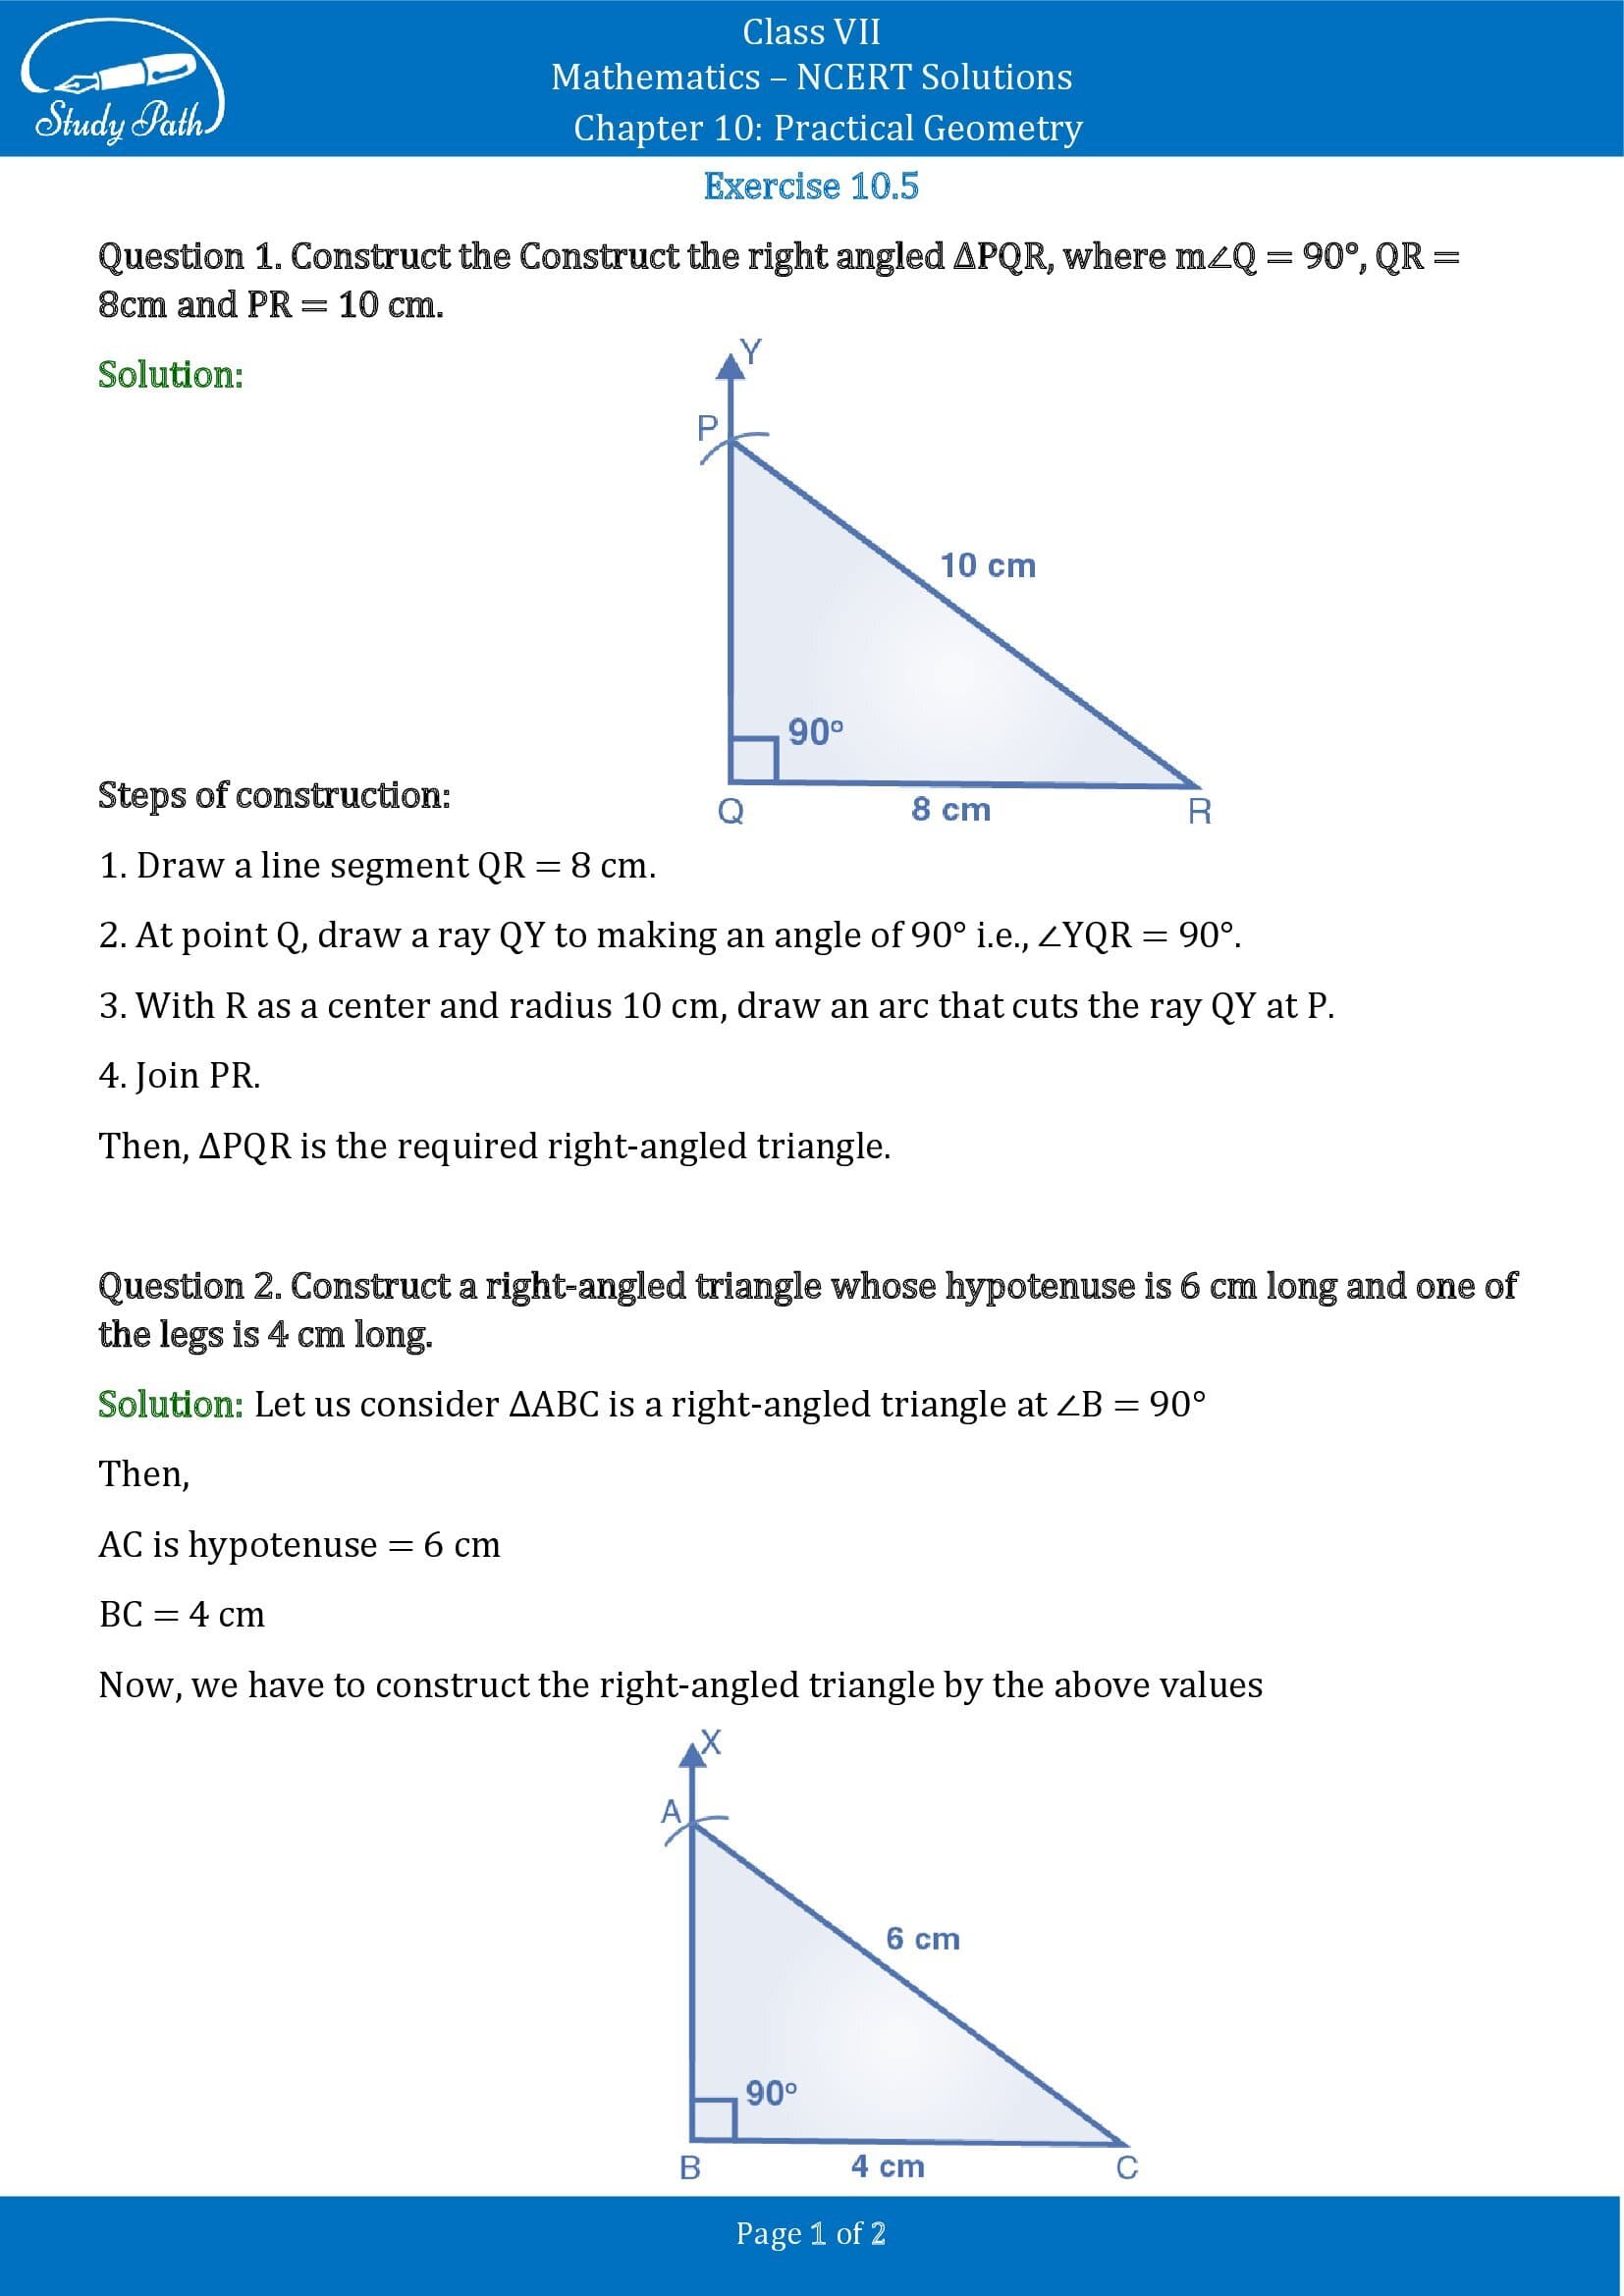 NCERT Solutions for Class 7 Maths Chapter 10 Practical Geometry Exercise 10.5 00001